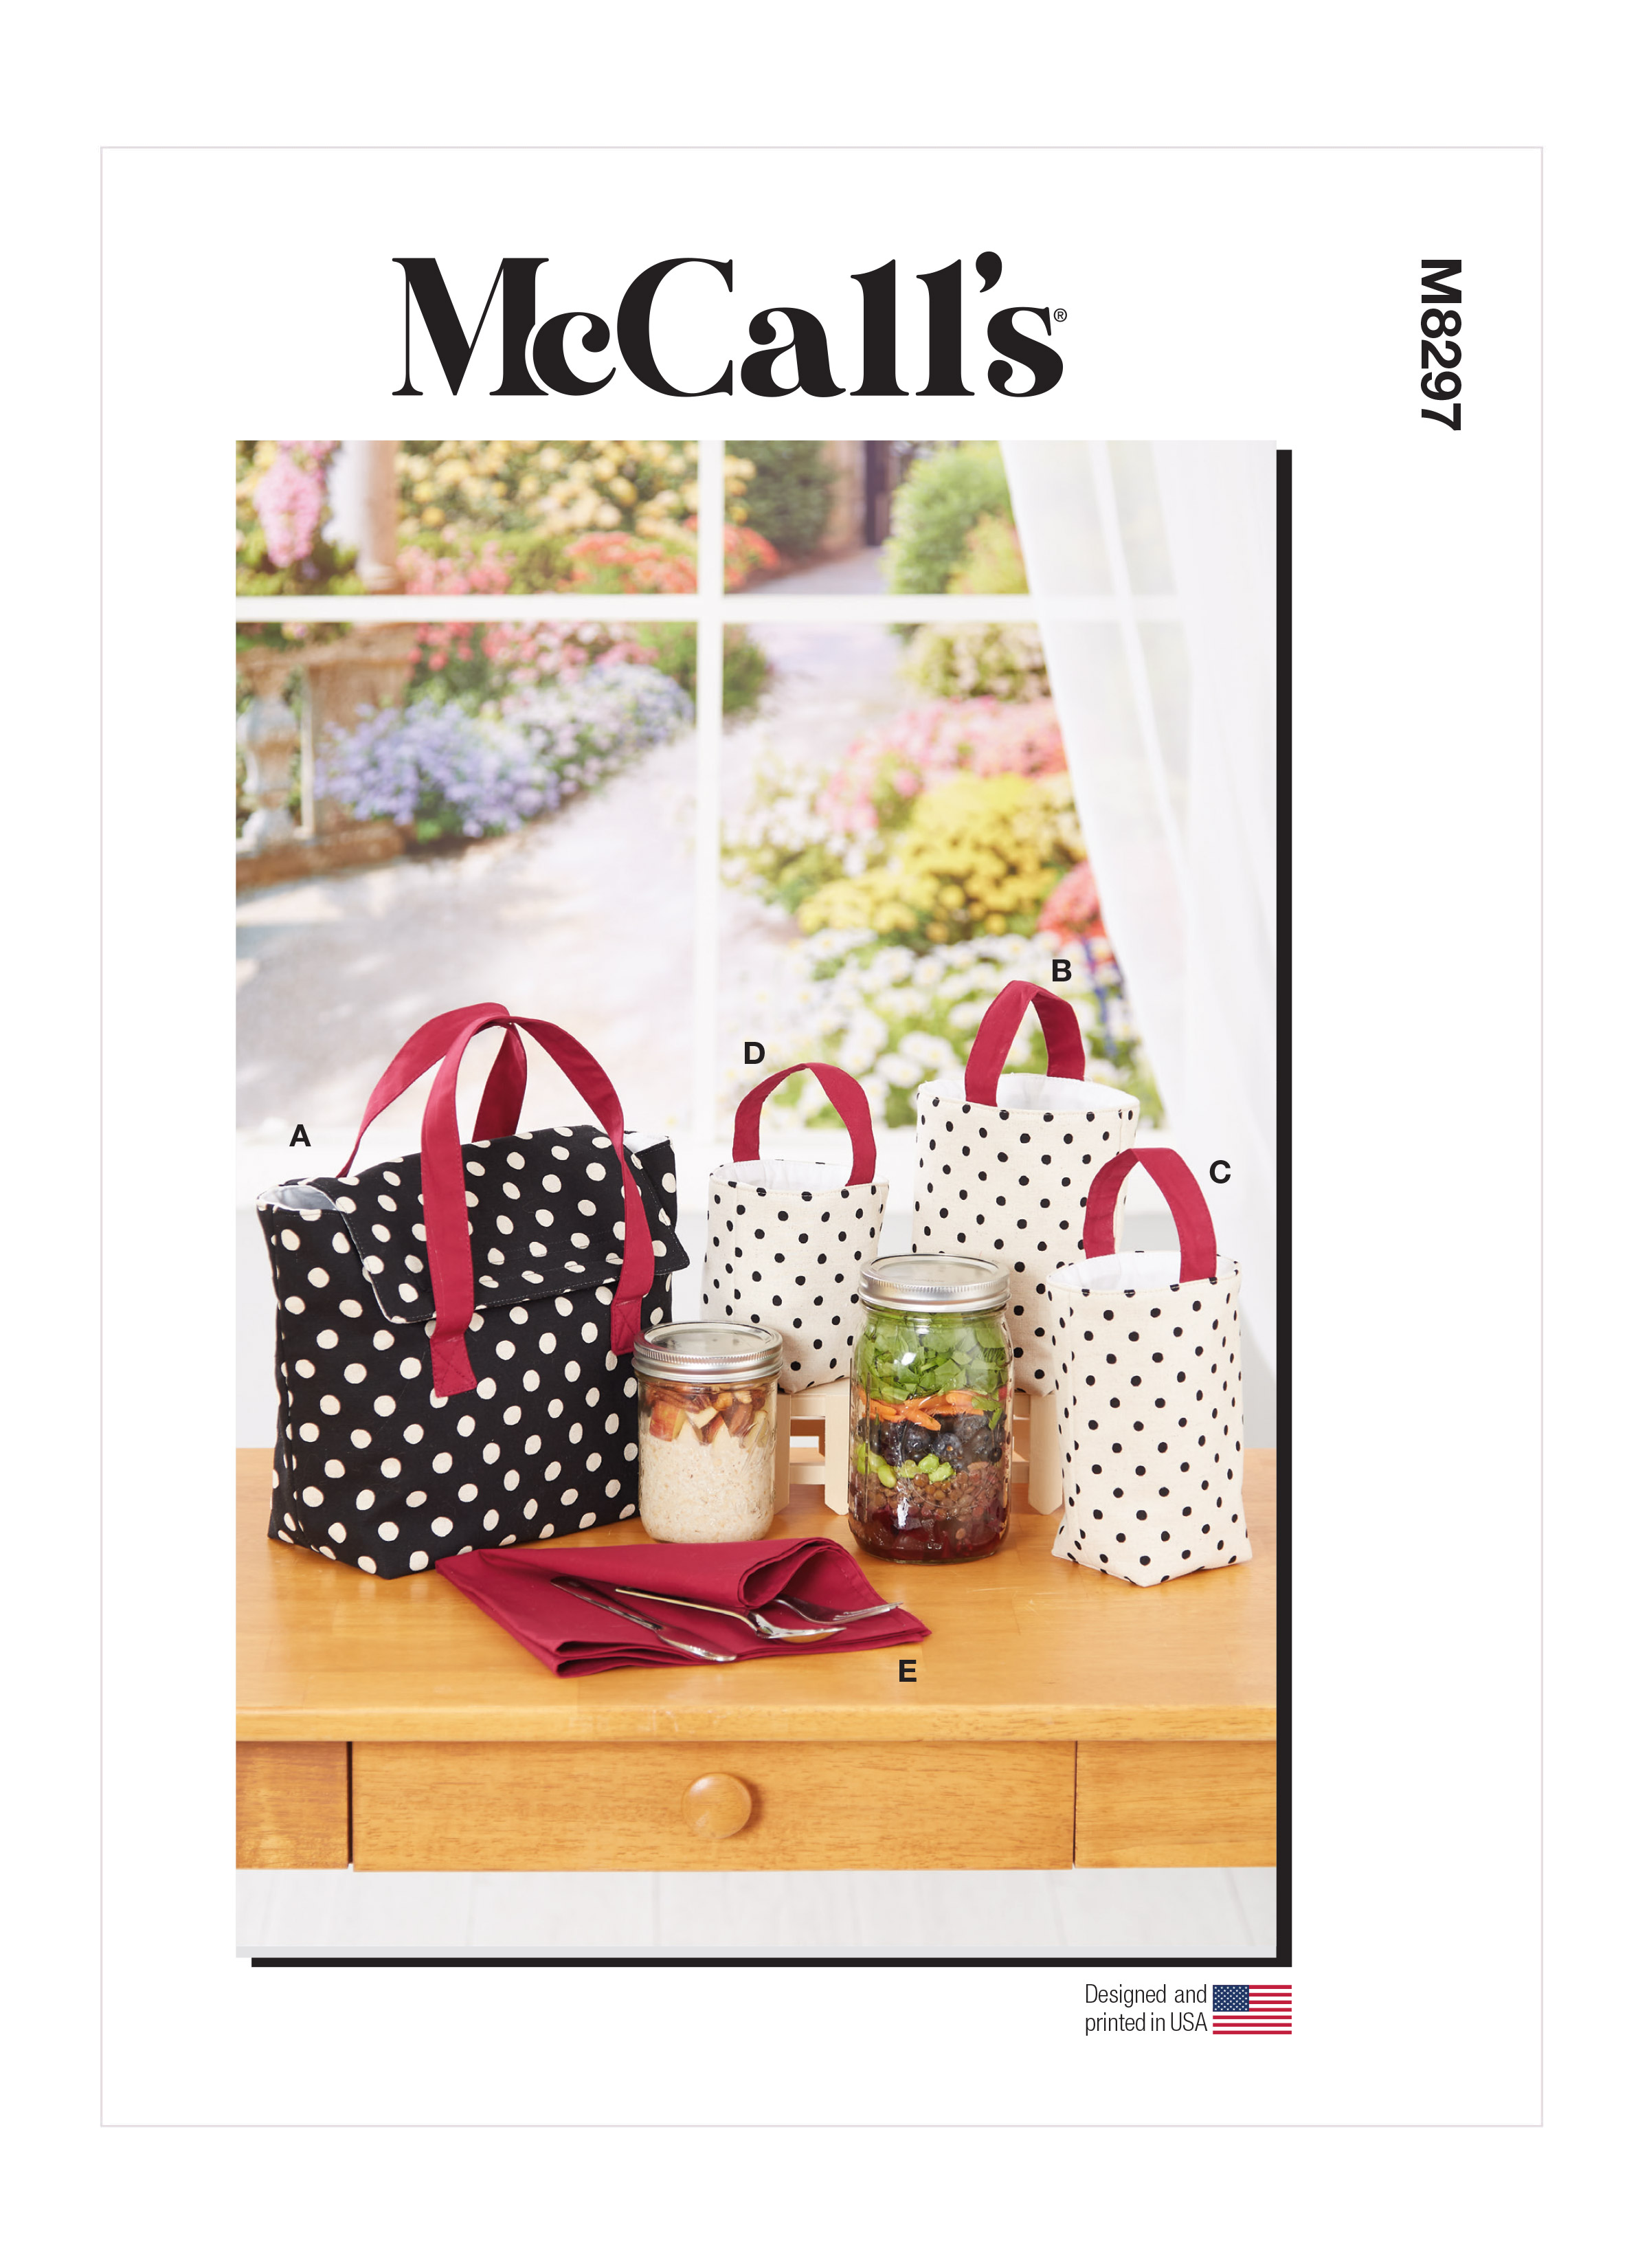  McCall's Sewing Pattern 7228 c1994 Shoulder Bag, Duffle,  Backpack, Water Bottle Holder : Arts, Crafts & Sewing